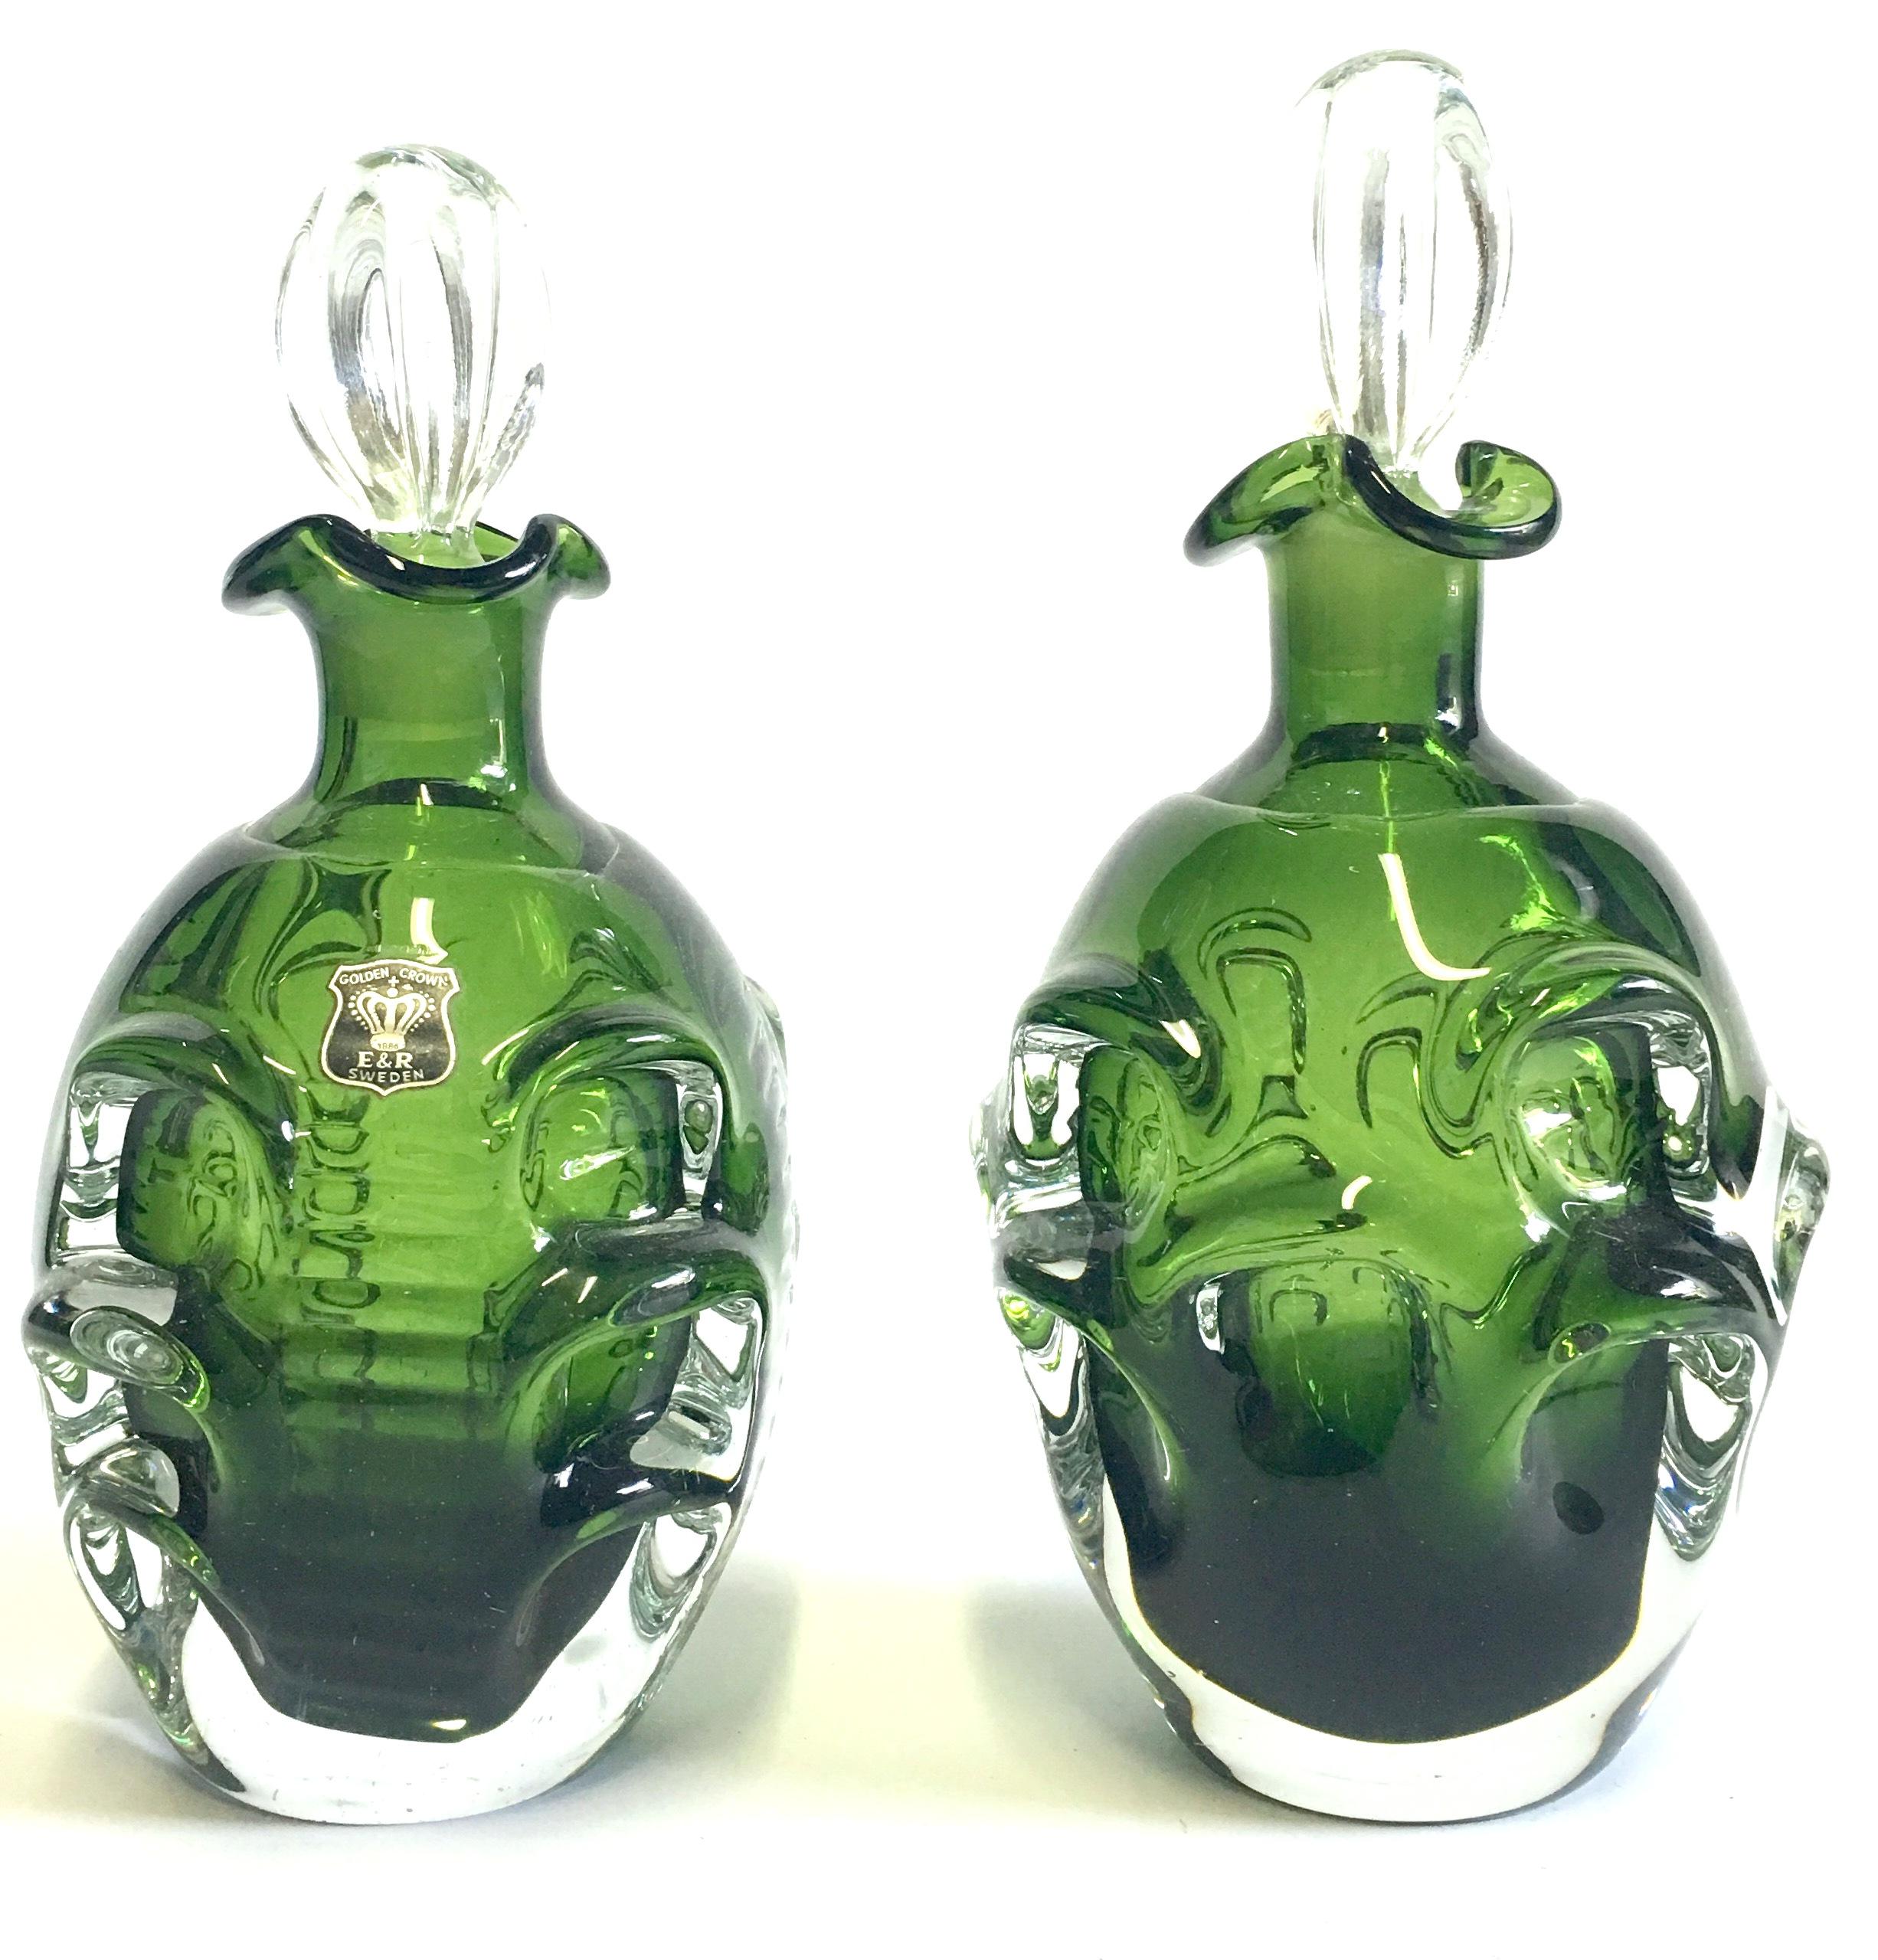 Mid-20th century modern pair of Swedish cut crystal liquor decanters by Bo Borgstrom for Aseda. The pair differentiates in size, slightly. The smaller decanter is smaller by .50